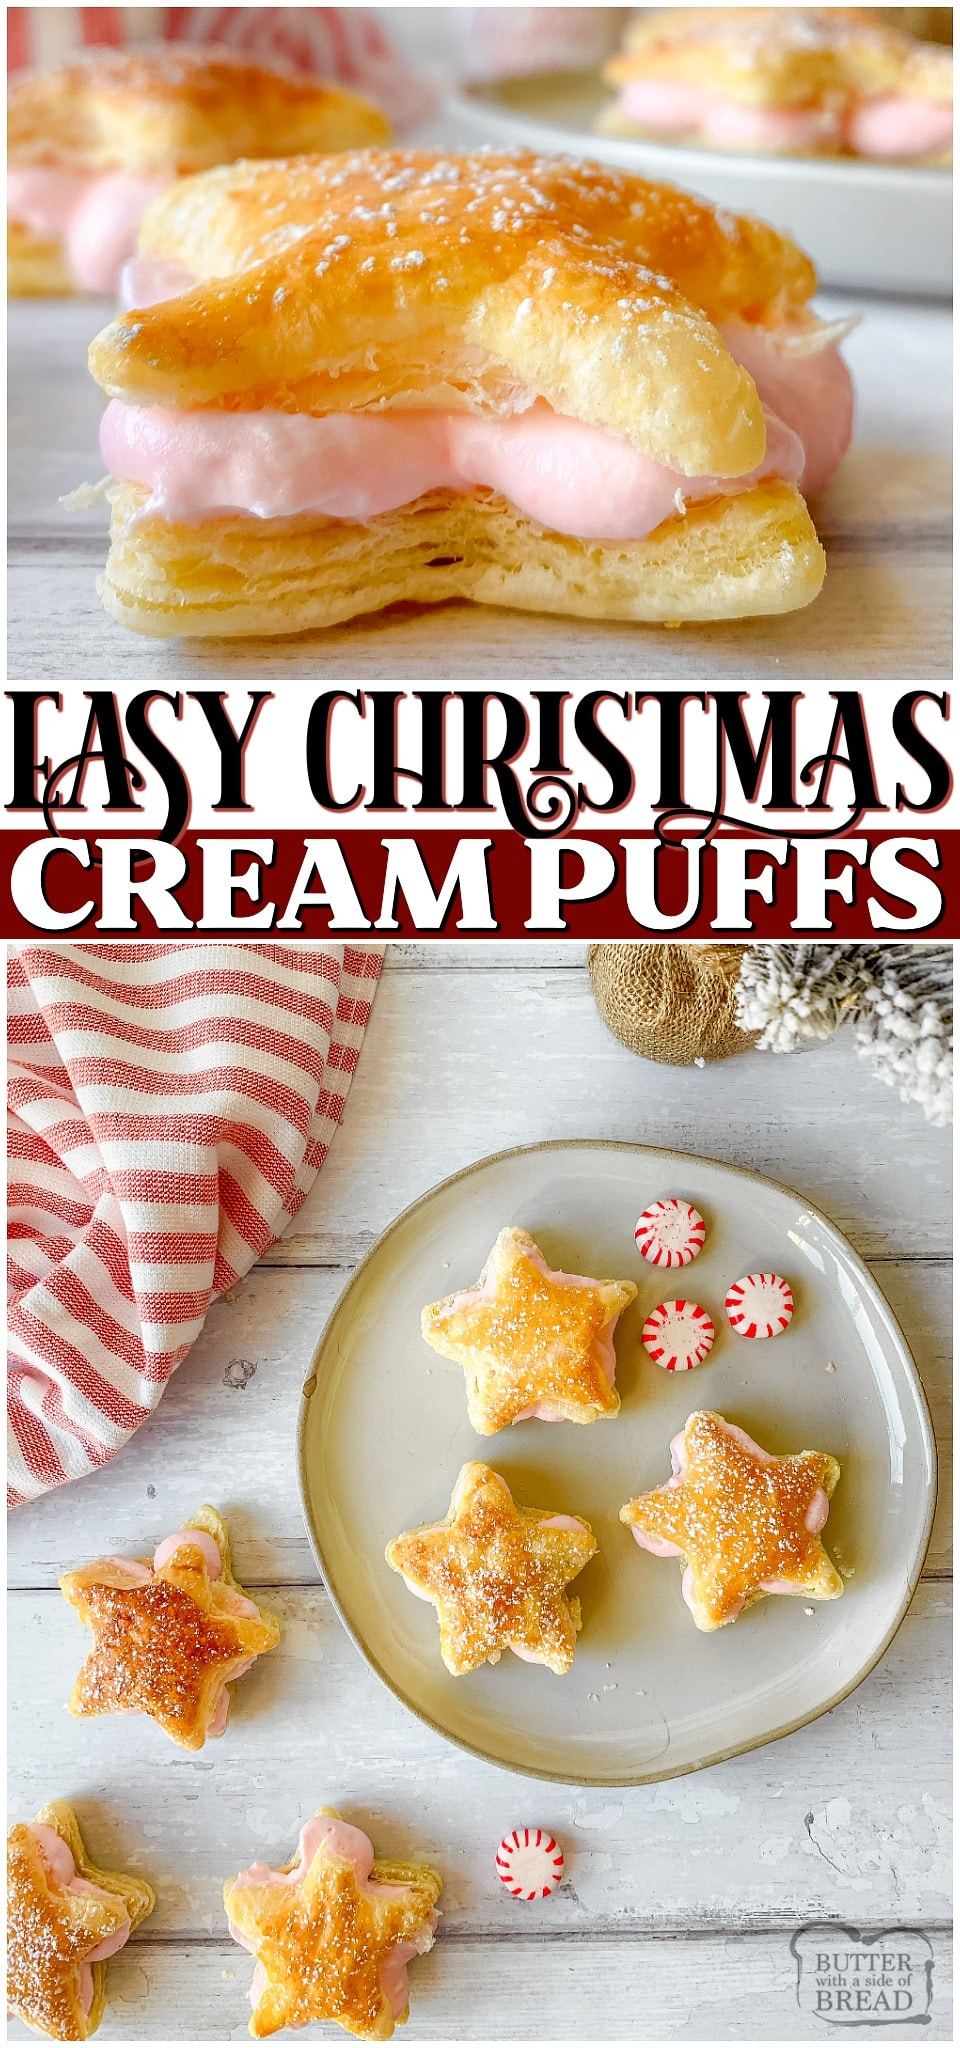 Peppermint Cream Puff Stars are a simple, 4-ingredient cream puffs perfect for Christmas!  With cute peppermint filled puff pastry stars, you can have a festive dessert that's so easy to make! #Christmas #creampuff #peppermint #dessert #easyrecipe from BUTTER WITH A SIDE OF BREAD